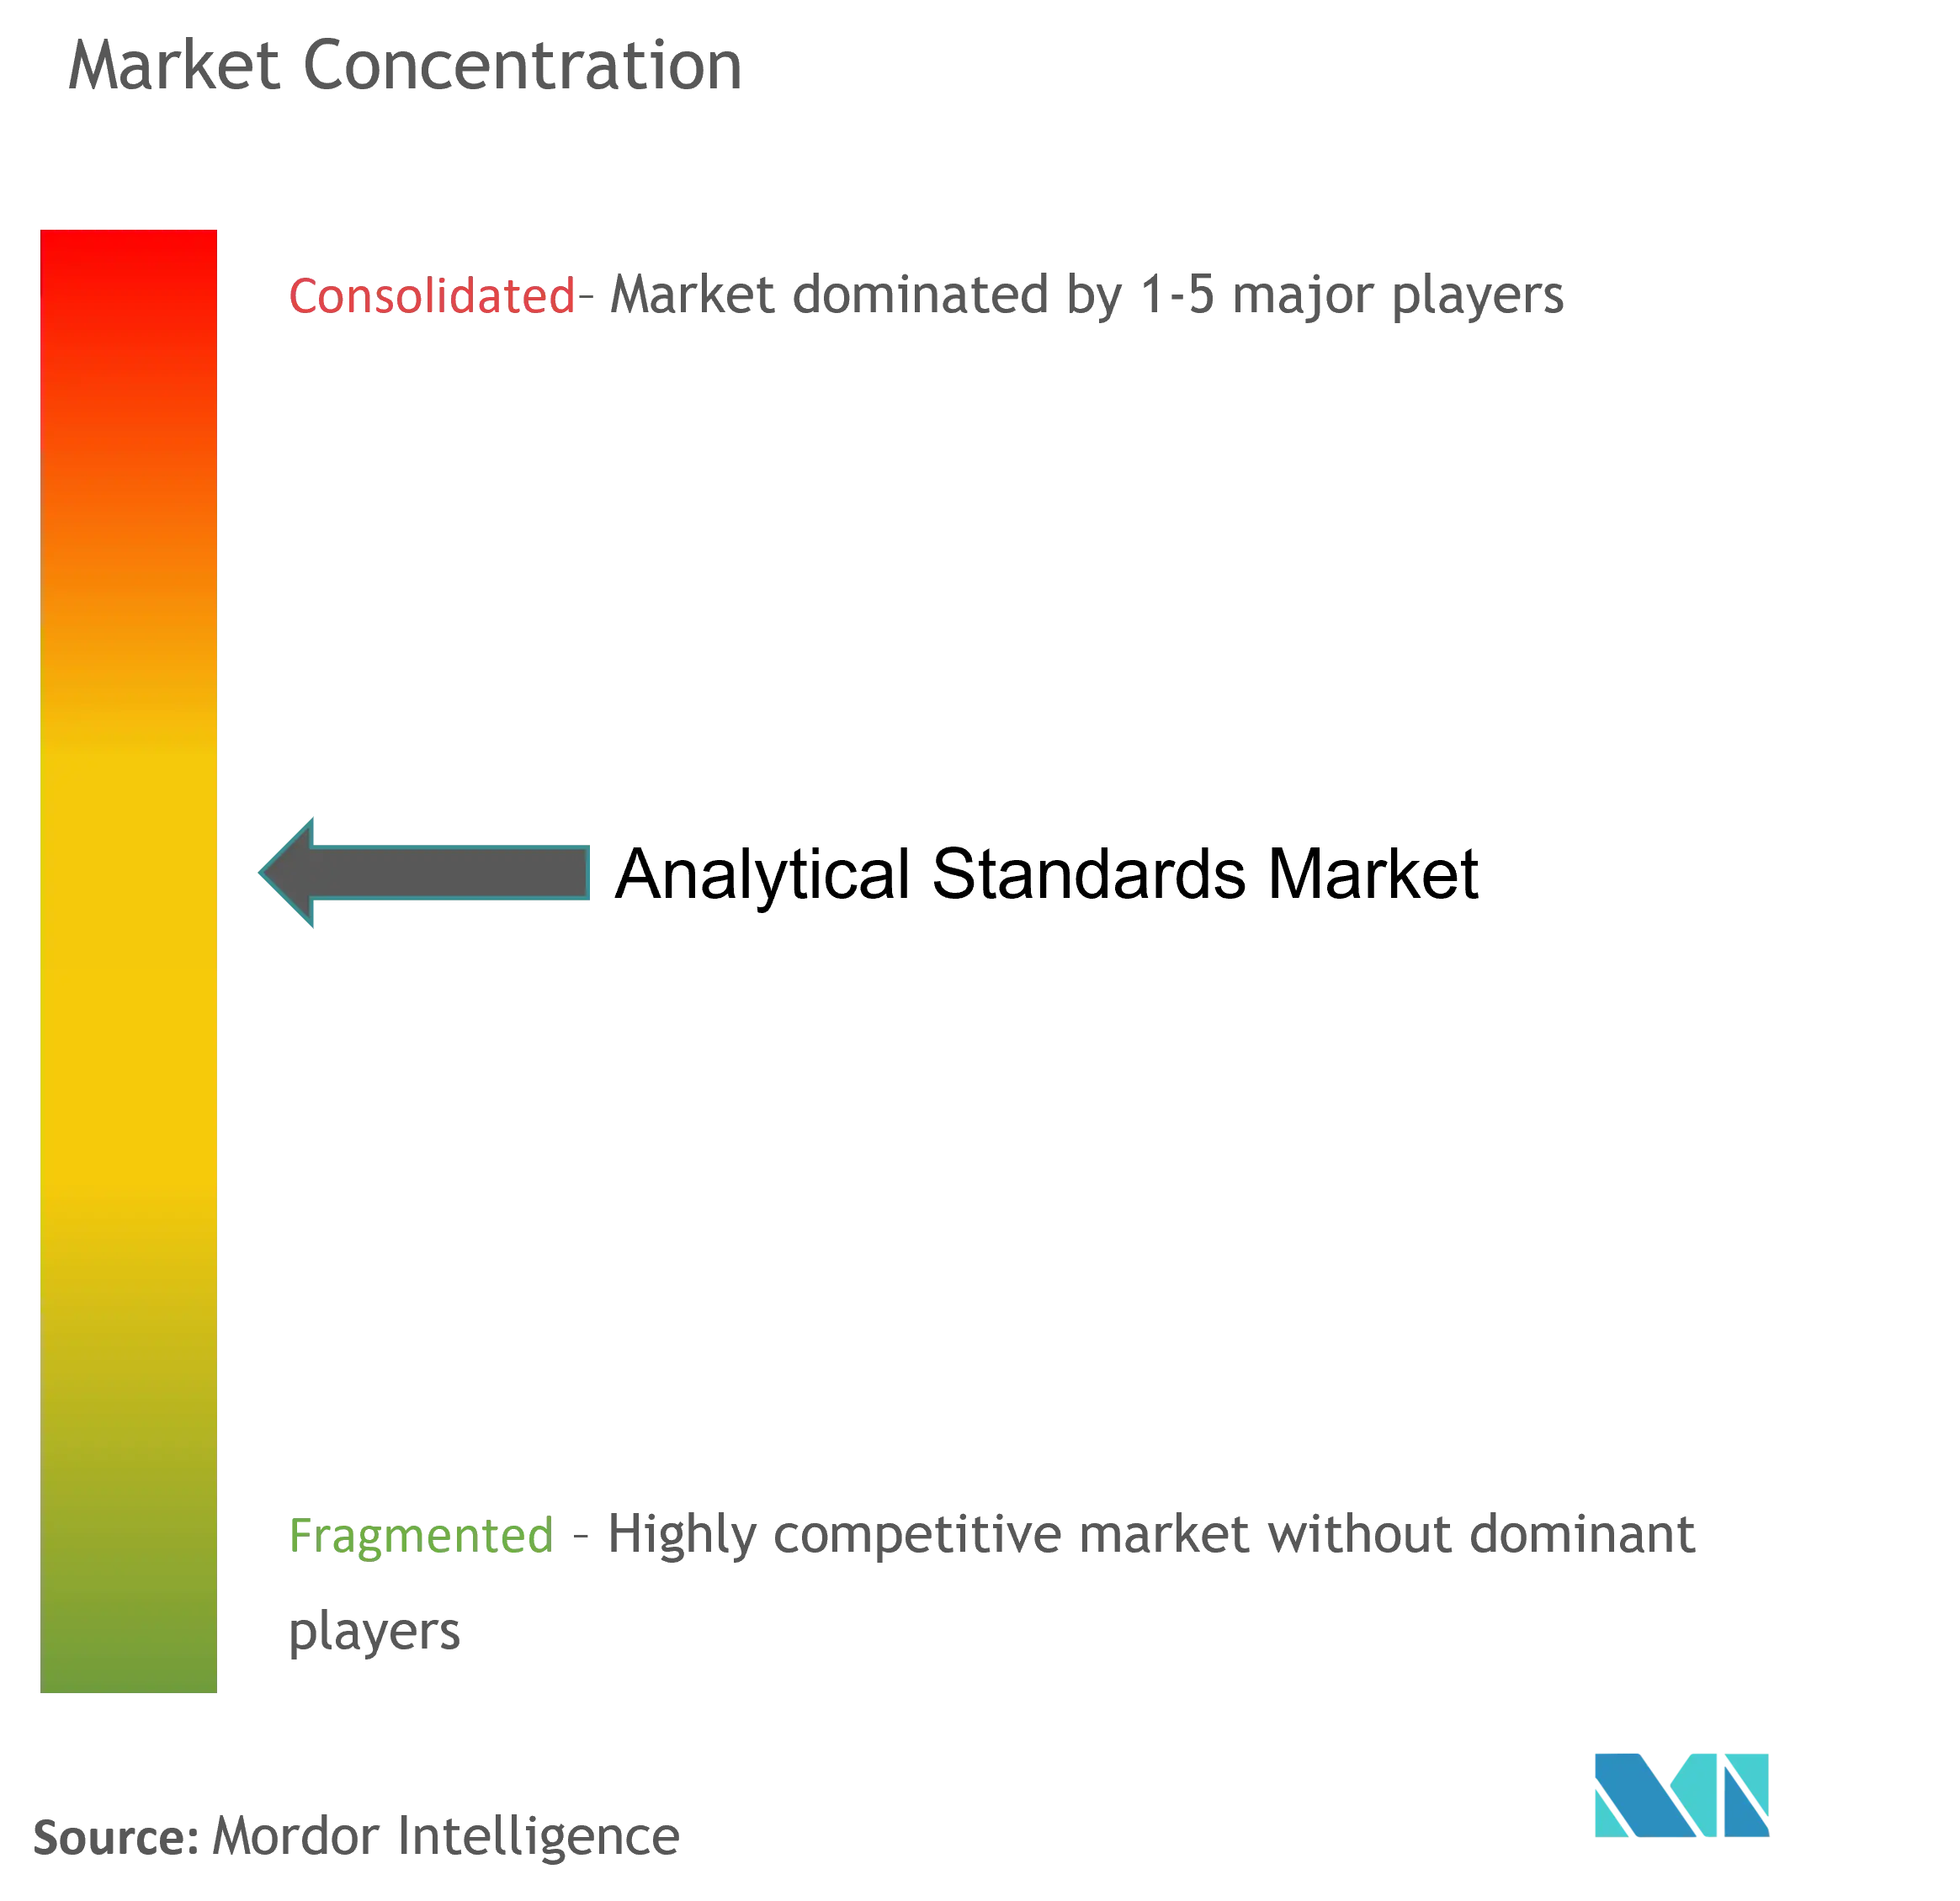 Analytical Standards Market Concentration